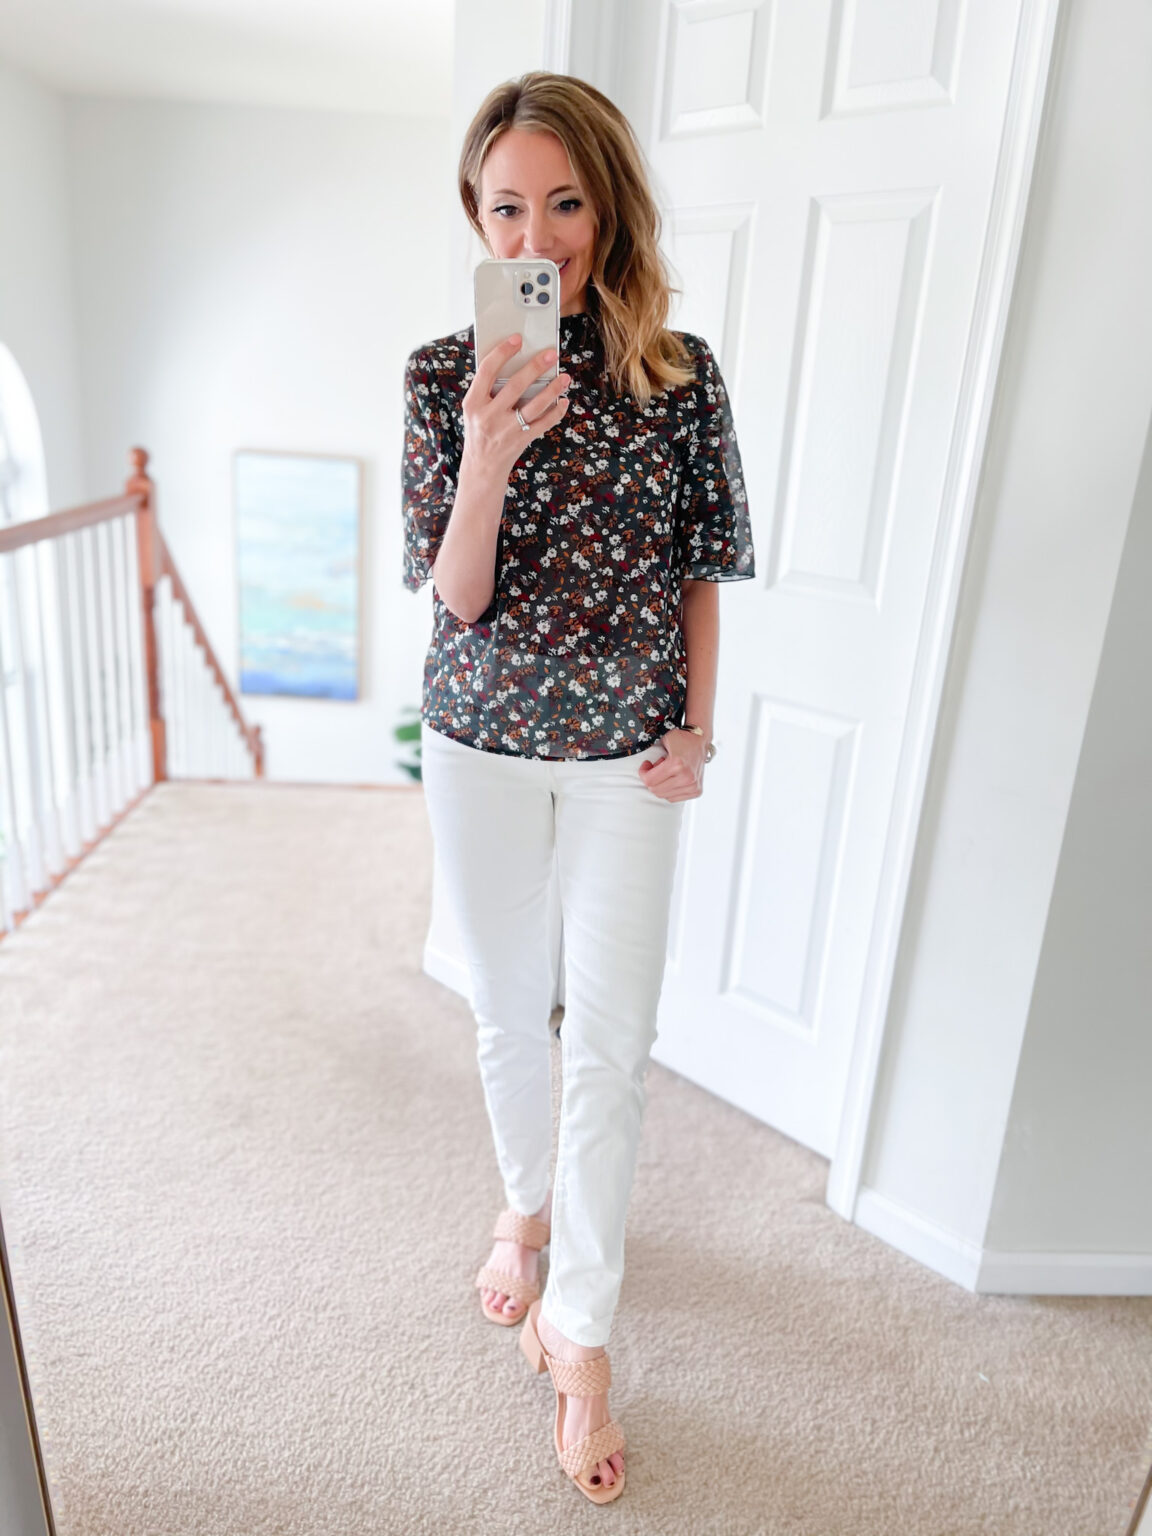 The Best White Jeans! (And 5 tops to pair them with) - Sweet Motherly